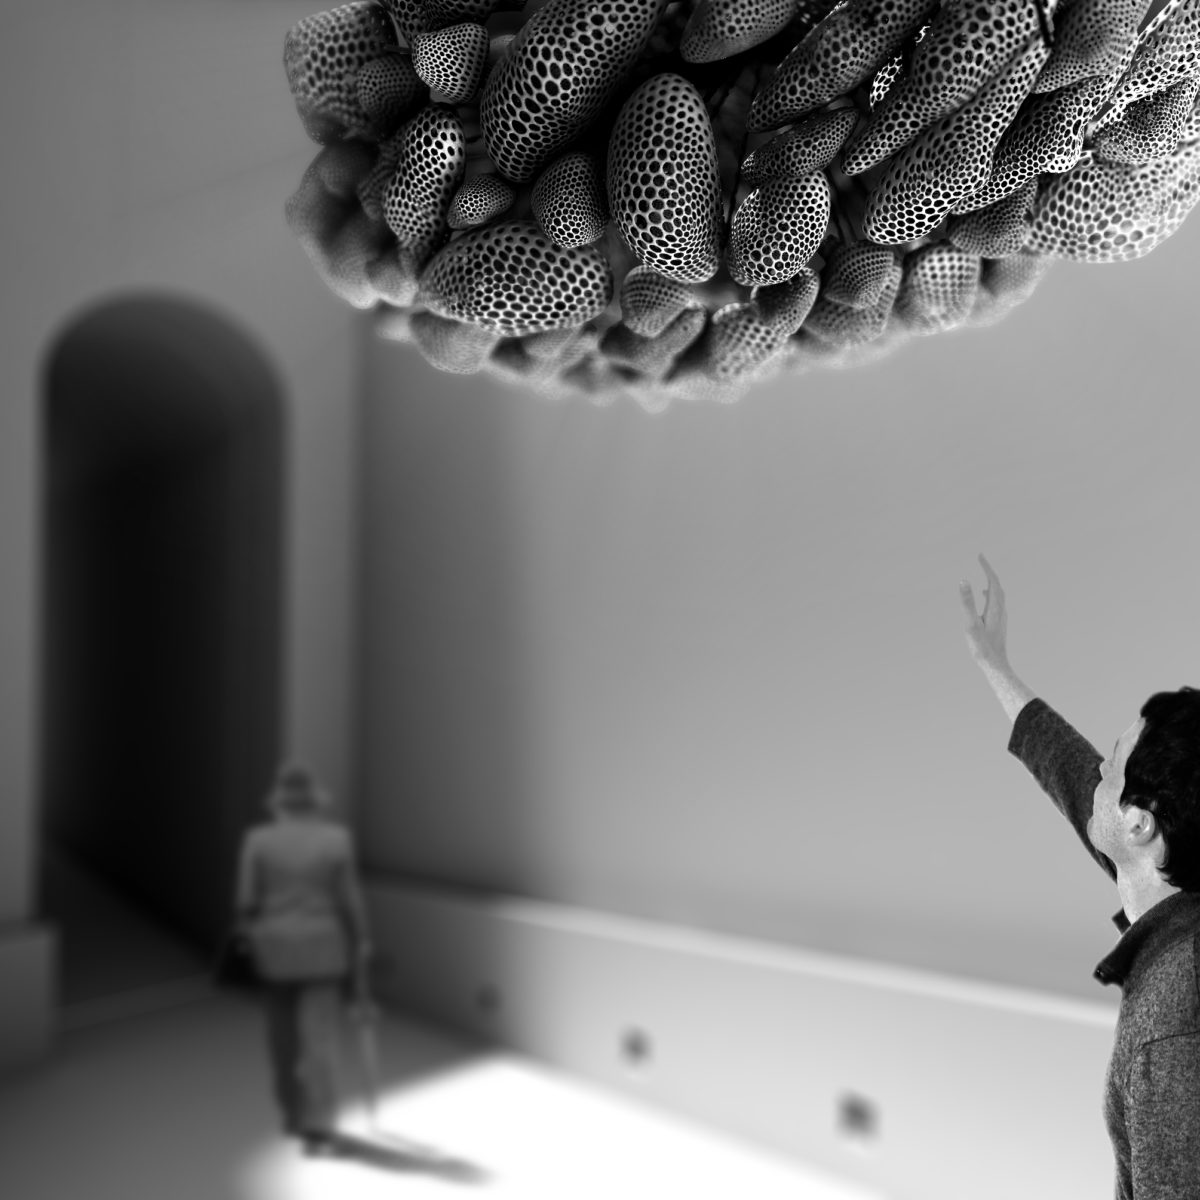 Overcast - Guan Lee, Mamou-Mani - 3D Printed Cloudlets Ceiling Installation - Day View of Installation at the V&A Museum